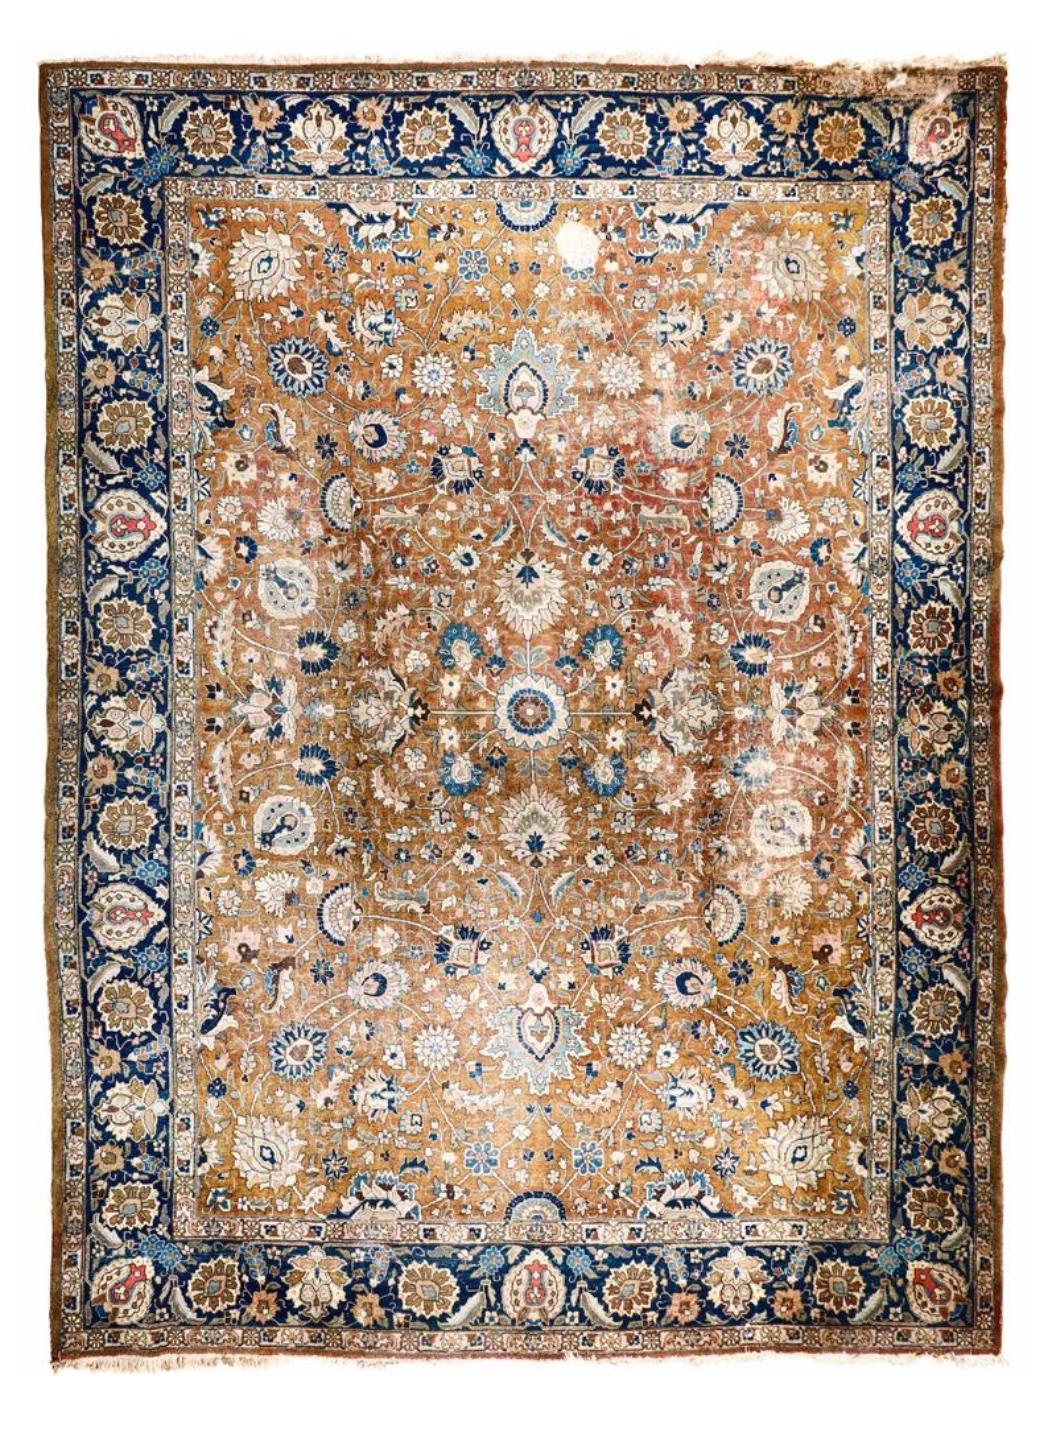 Persian carpet with toffee colored center and large floral pattern.